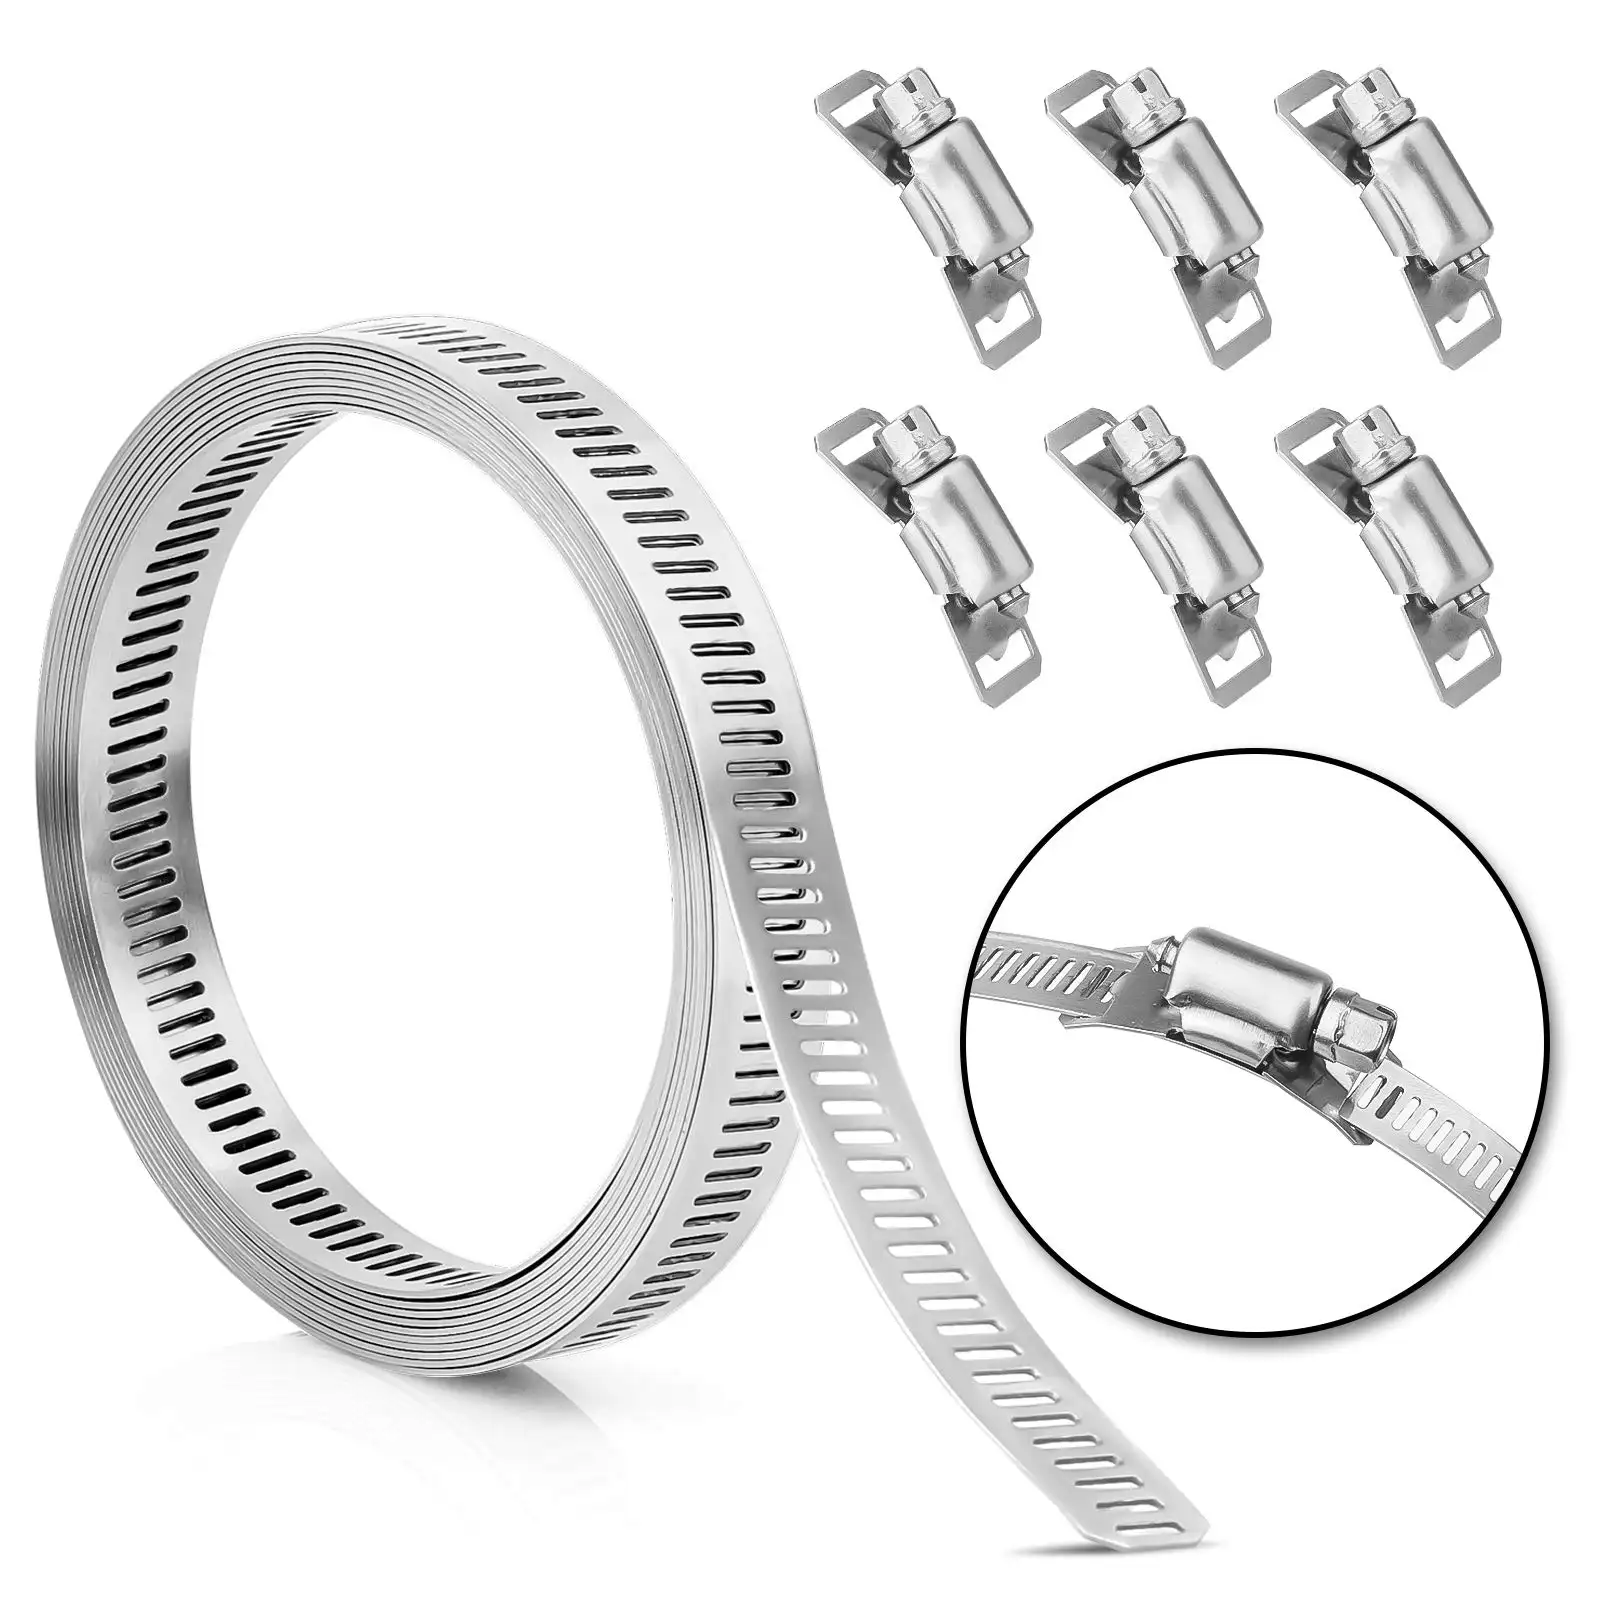 High quality heavy duty clamp hose stainless steel pipe clamp American radiator hose clamp